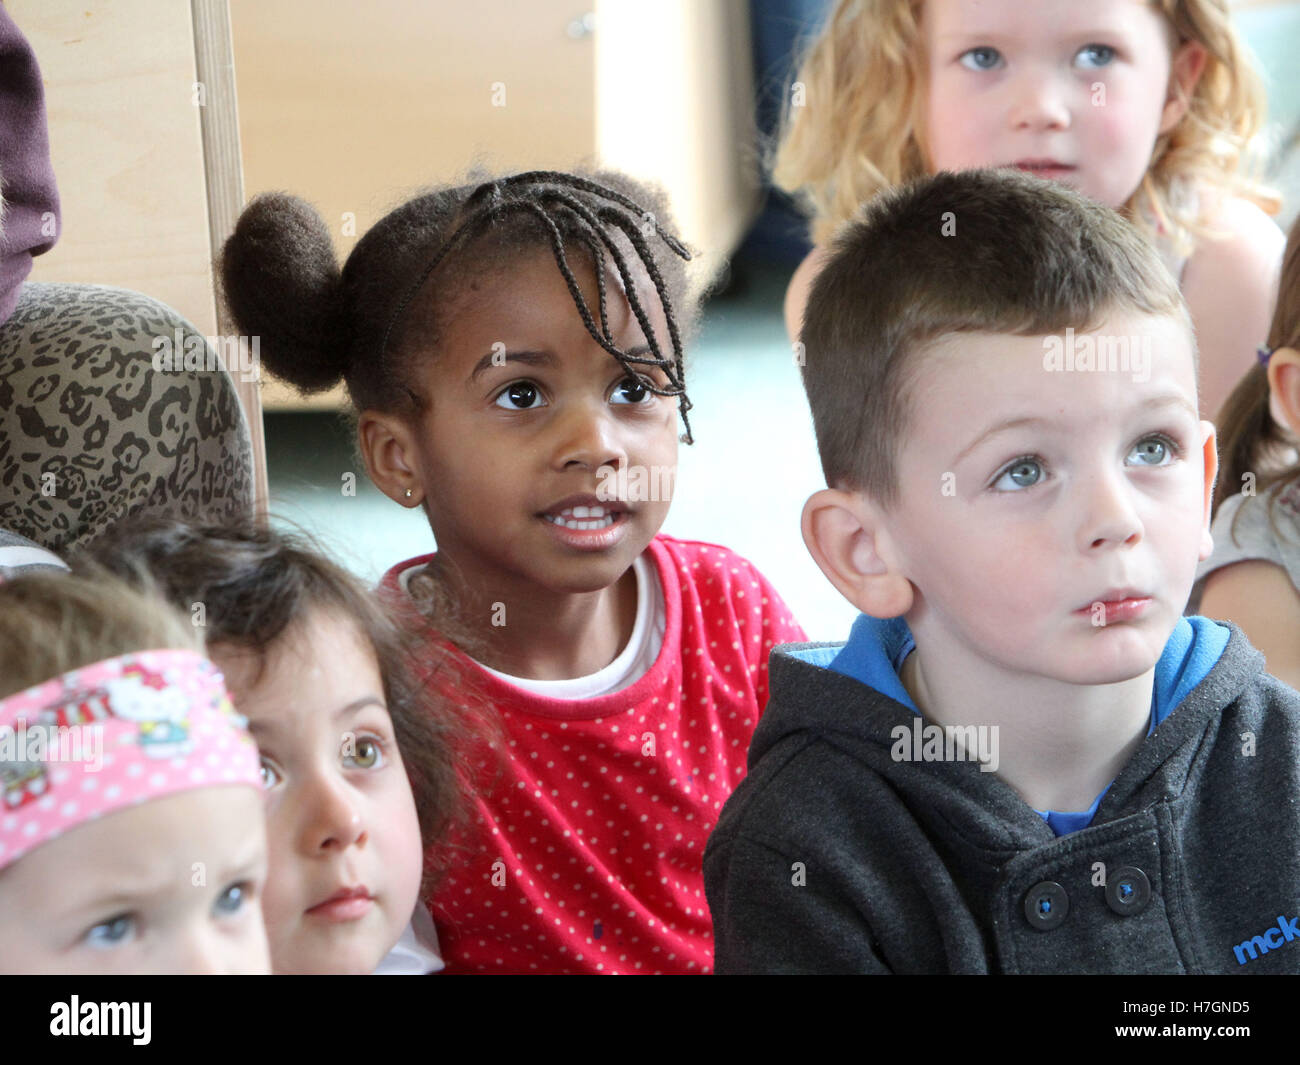 Nursery children looking engaged and interested Stock Photo